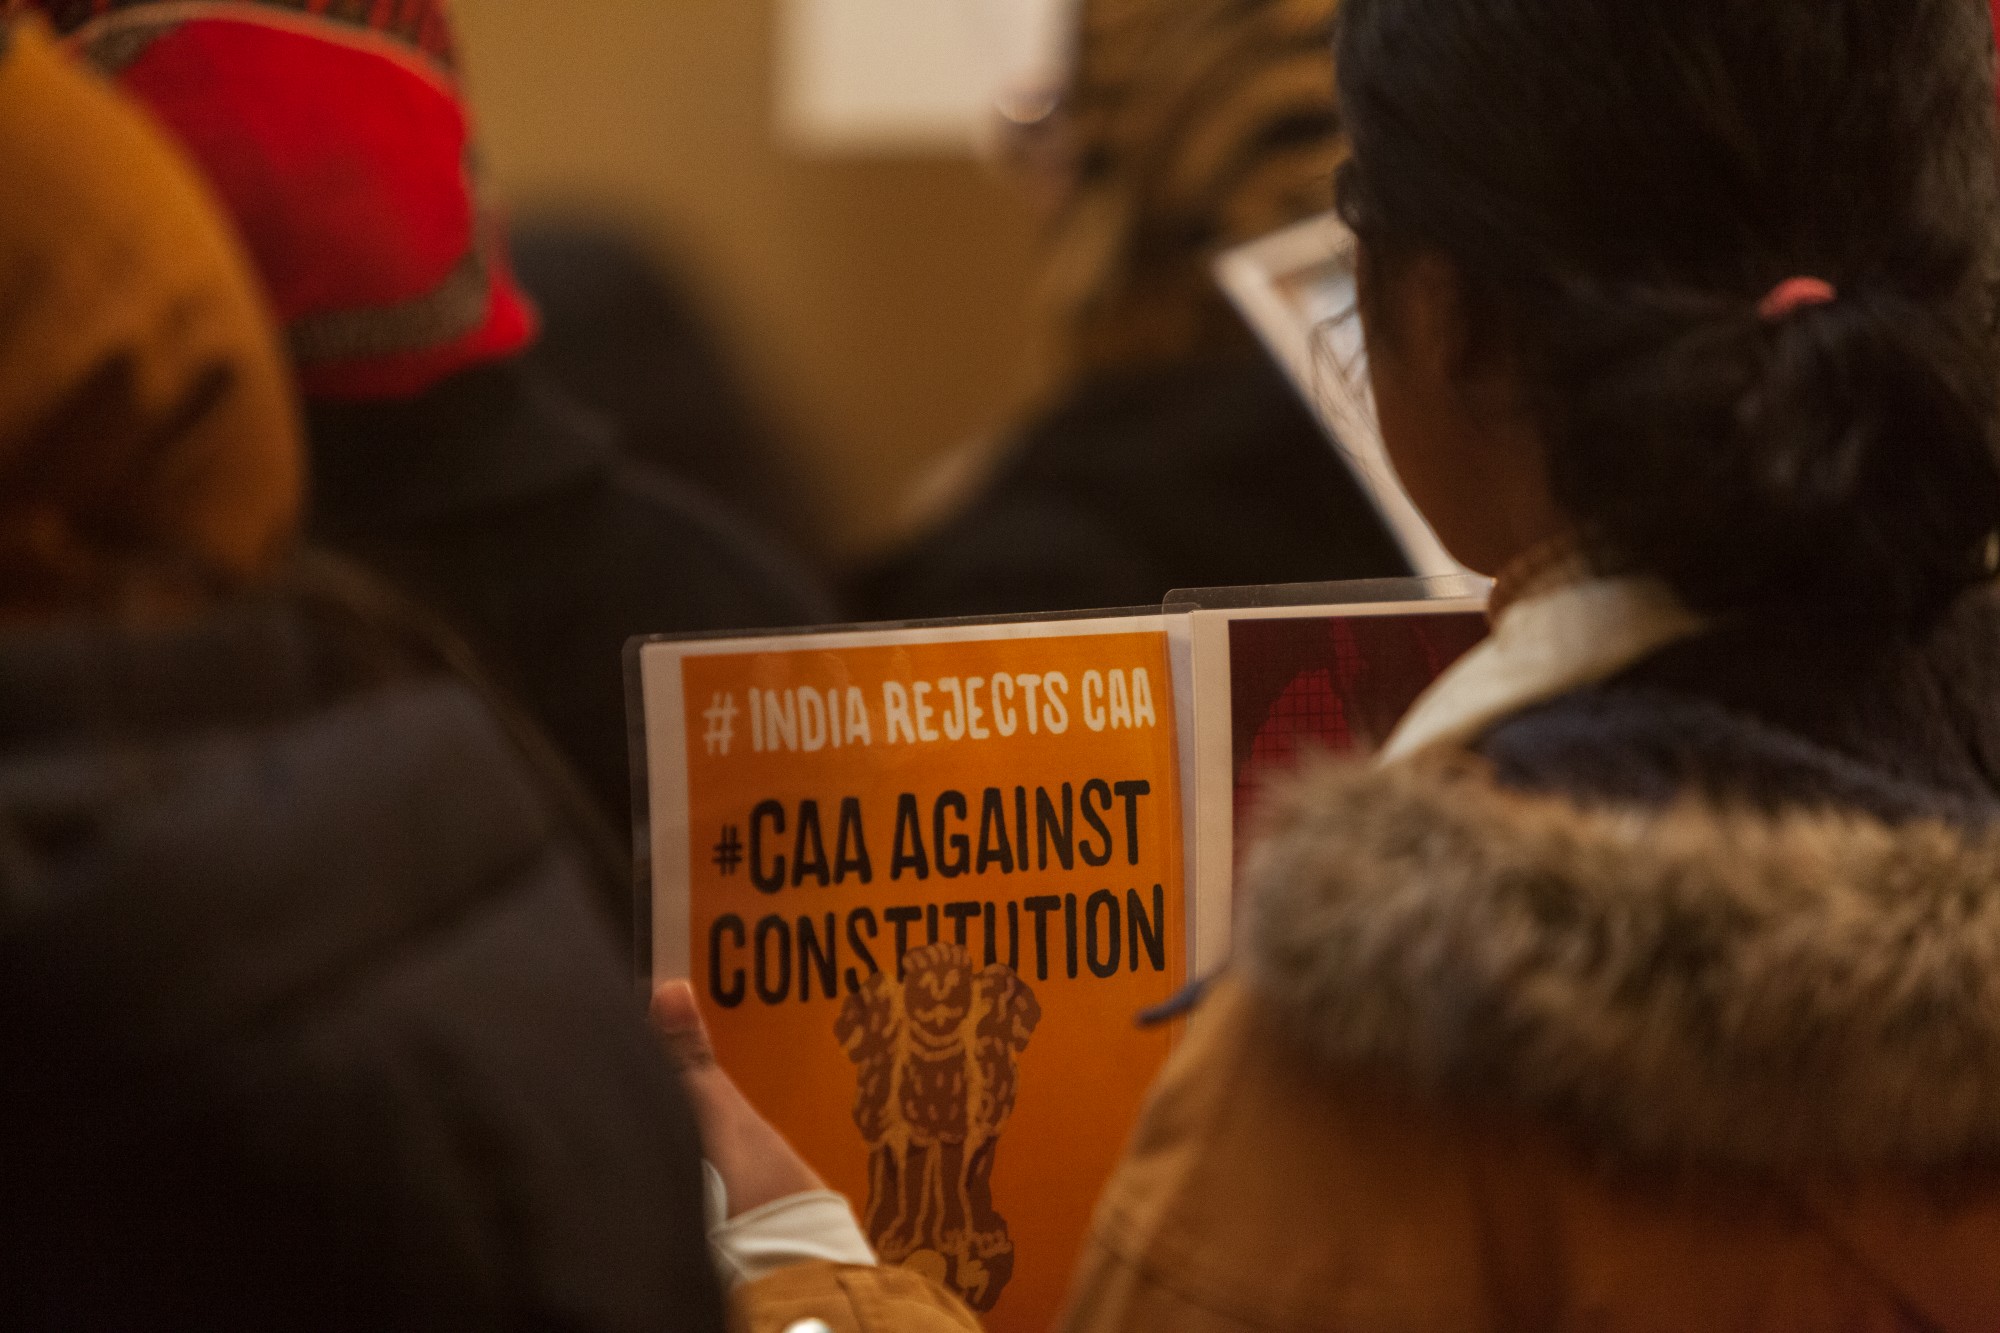 A young protestor holds a sign at an event opposing Indias recent passage of the Citizenship Amendment Act at the Minnesota State Capitol Building on Sunday, Jan. 26. This legislation offers Indian citizenship to refugees of several religious groups, but does not apply to Muslims, despite their making up nearly 15% of the Indian population.